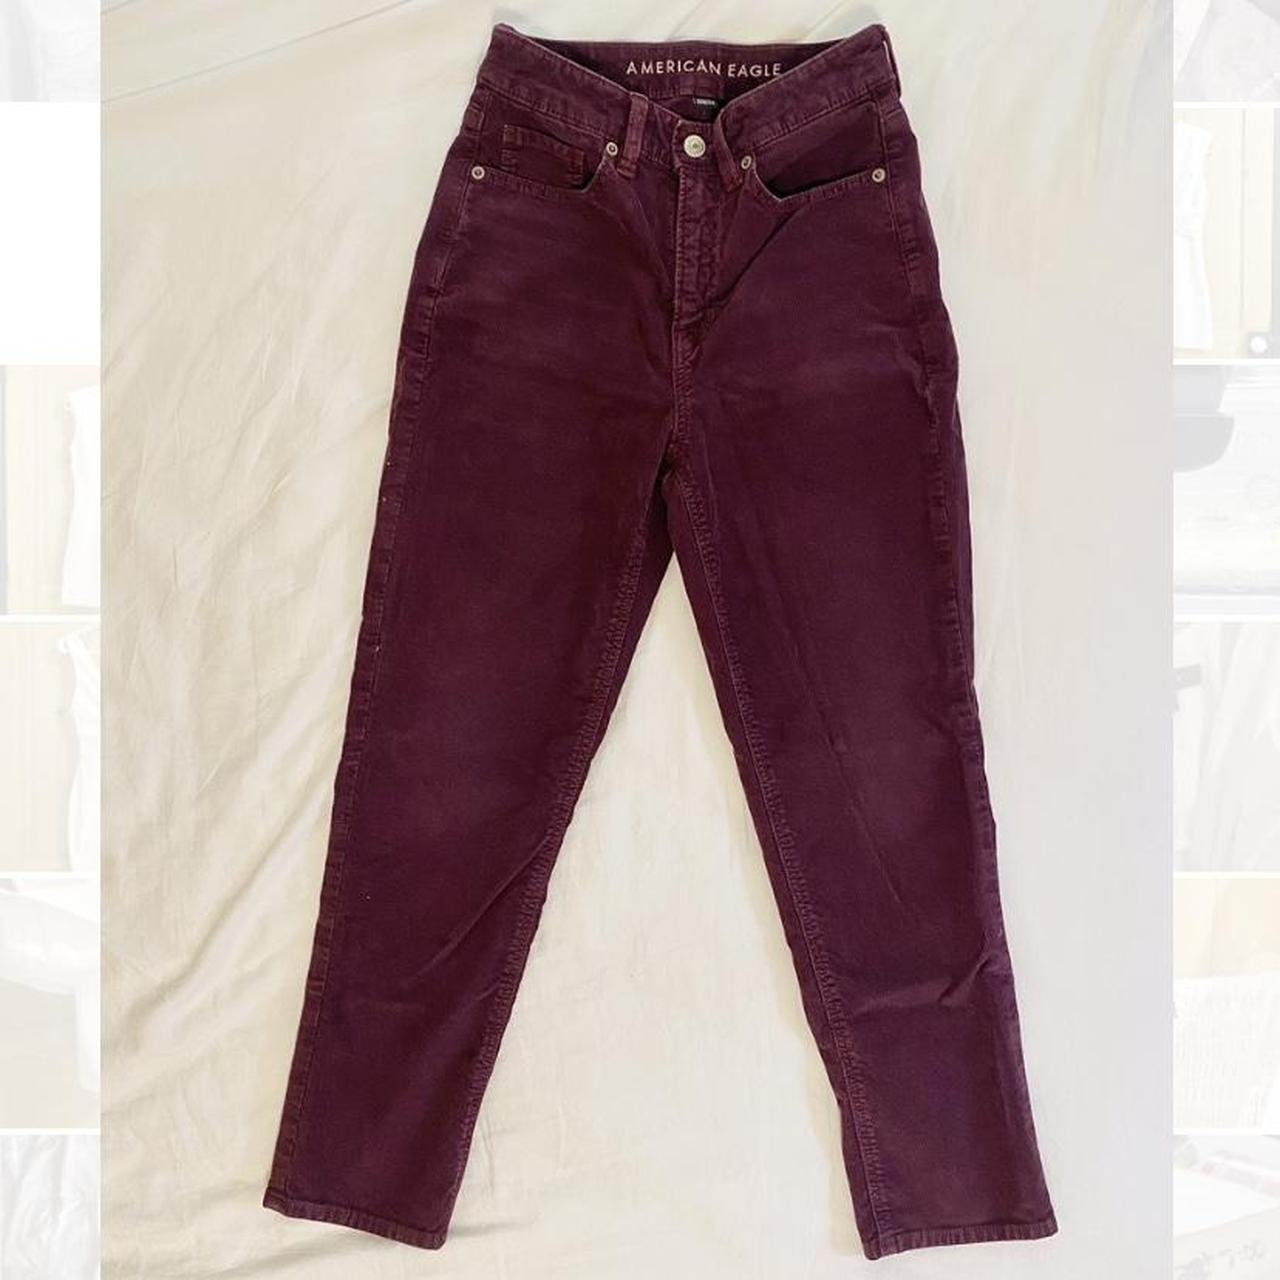 American Eagle Outfitters, Jeans, American Eagle Mauve Pink Jeggings